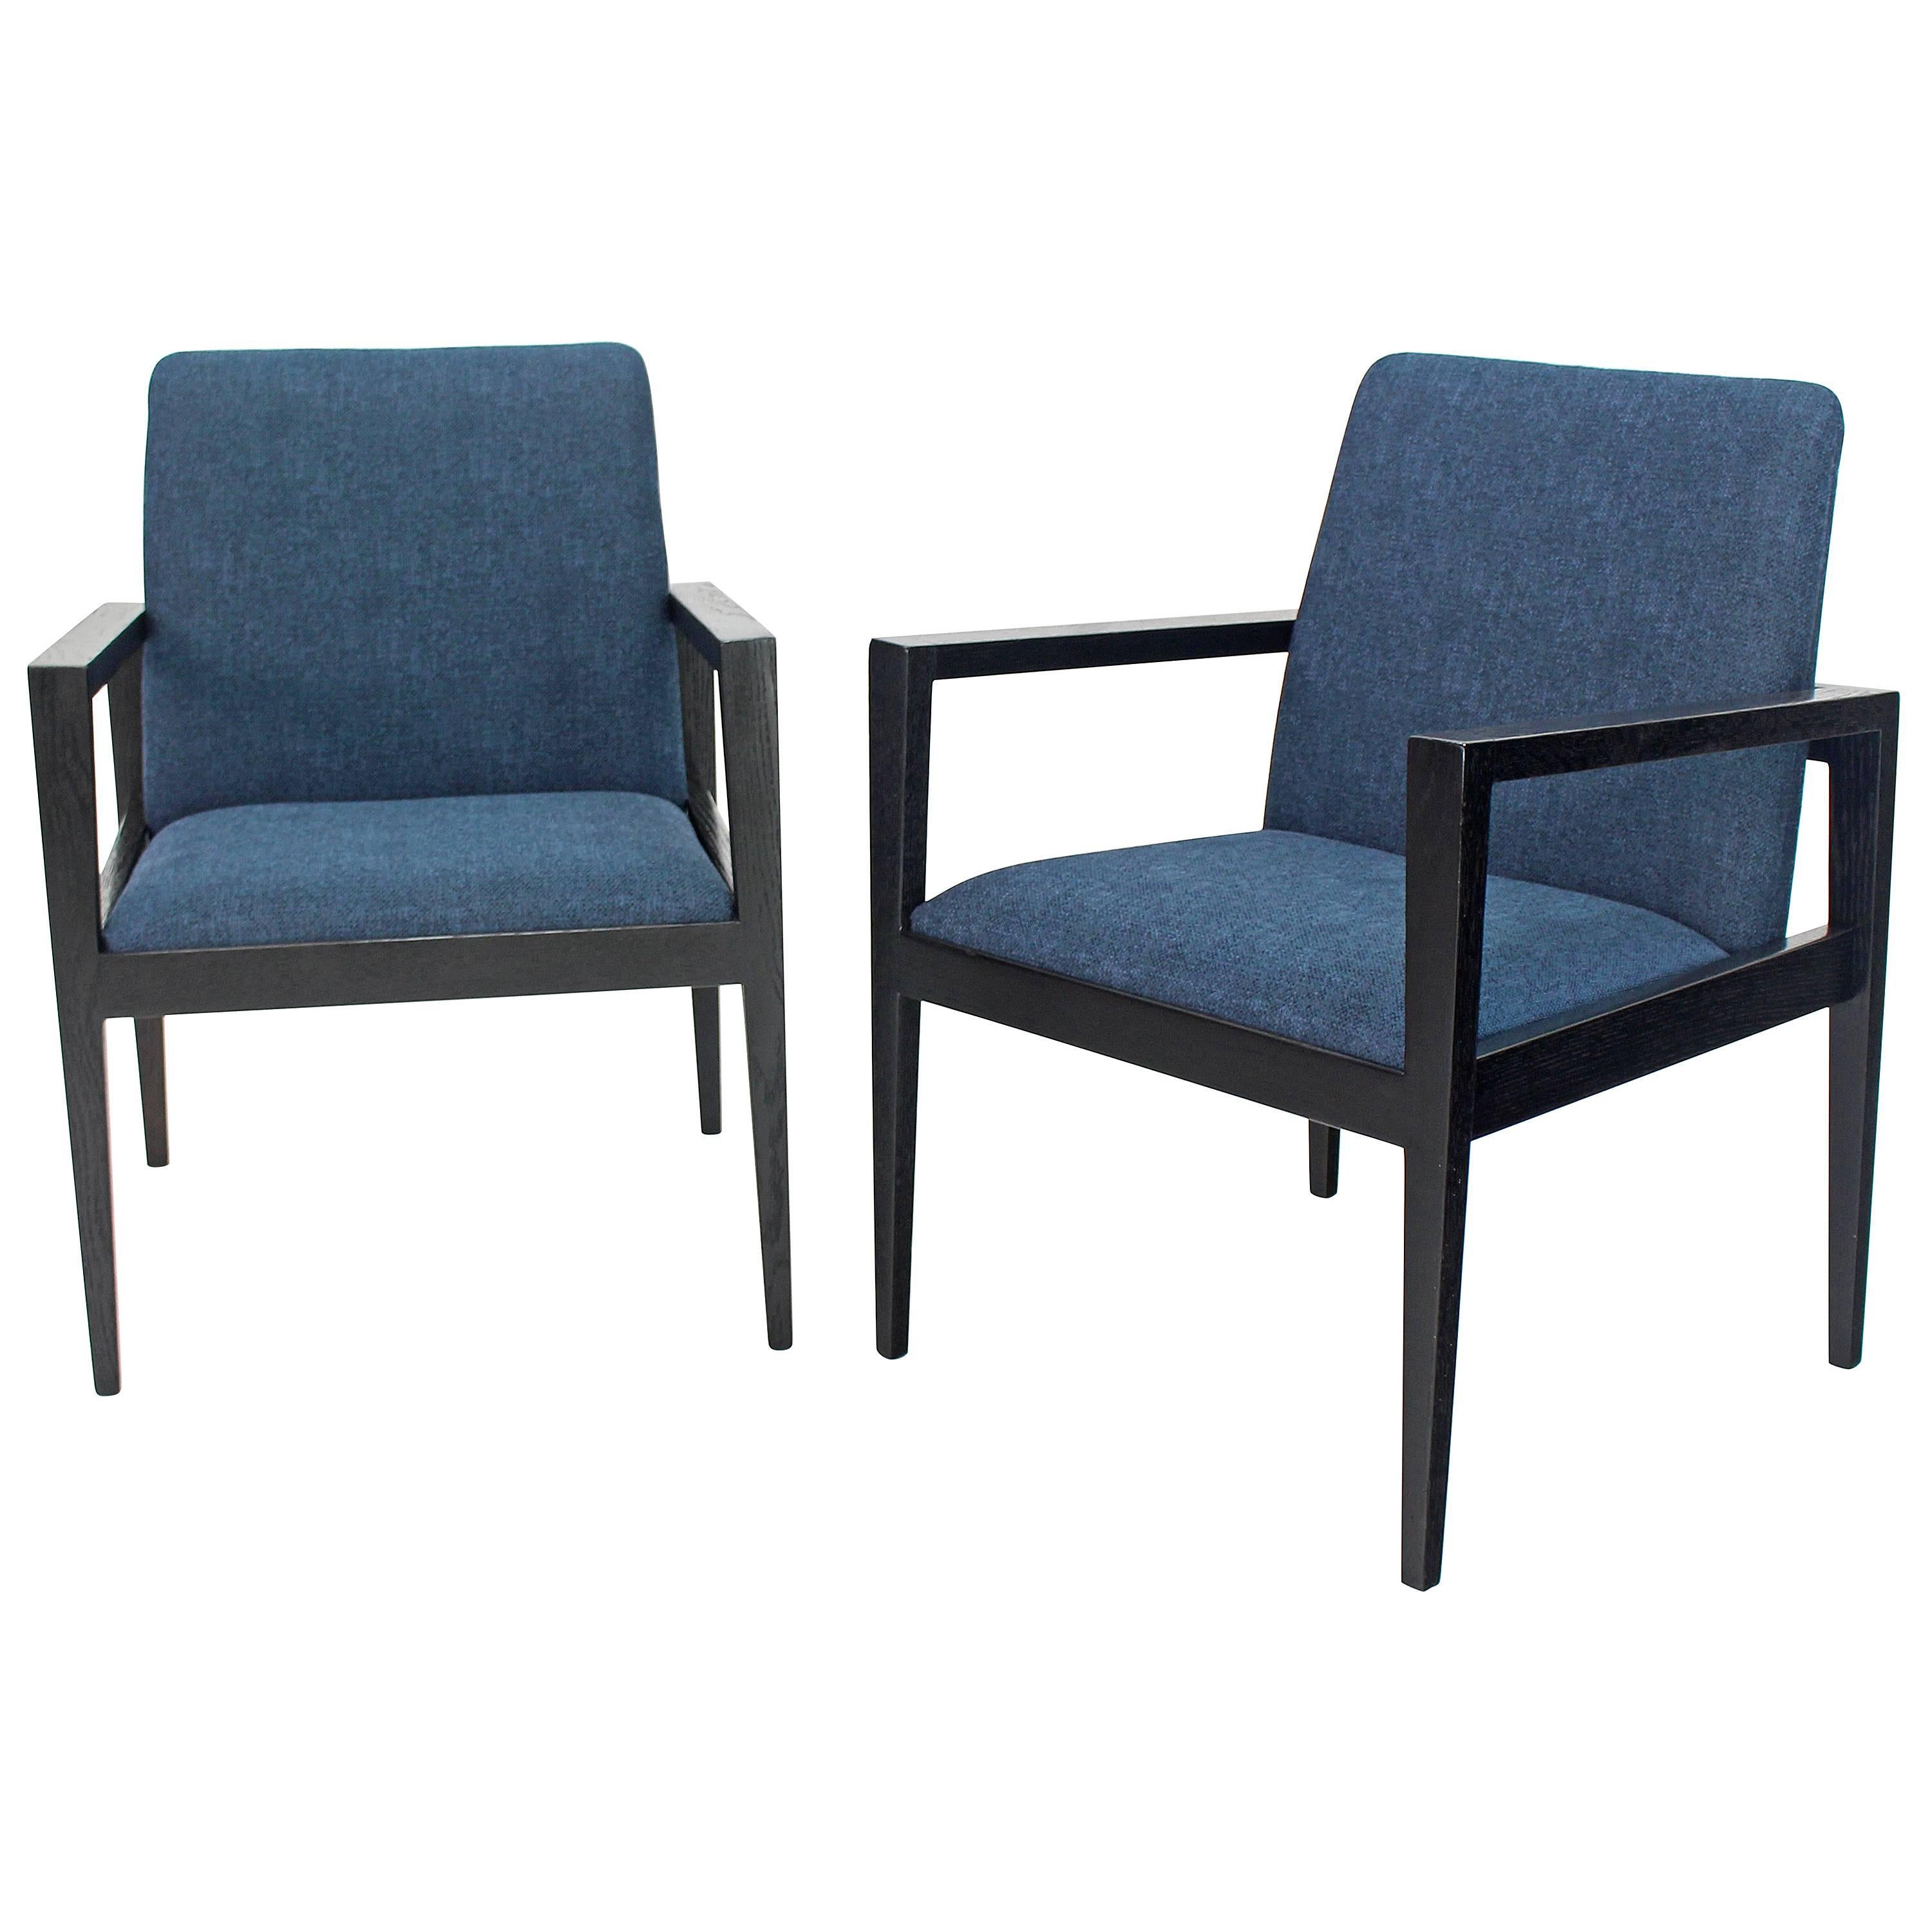 Pair of Mid-Century Modern Ebonized Lounge Chairs For Sale